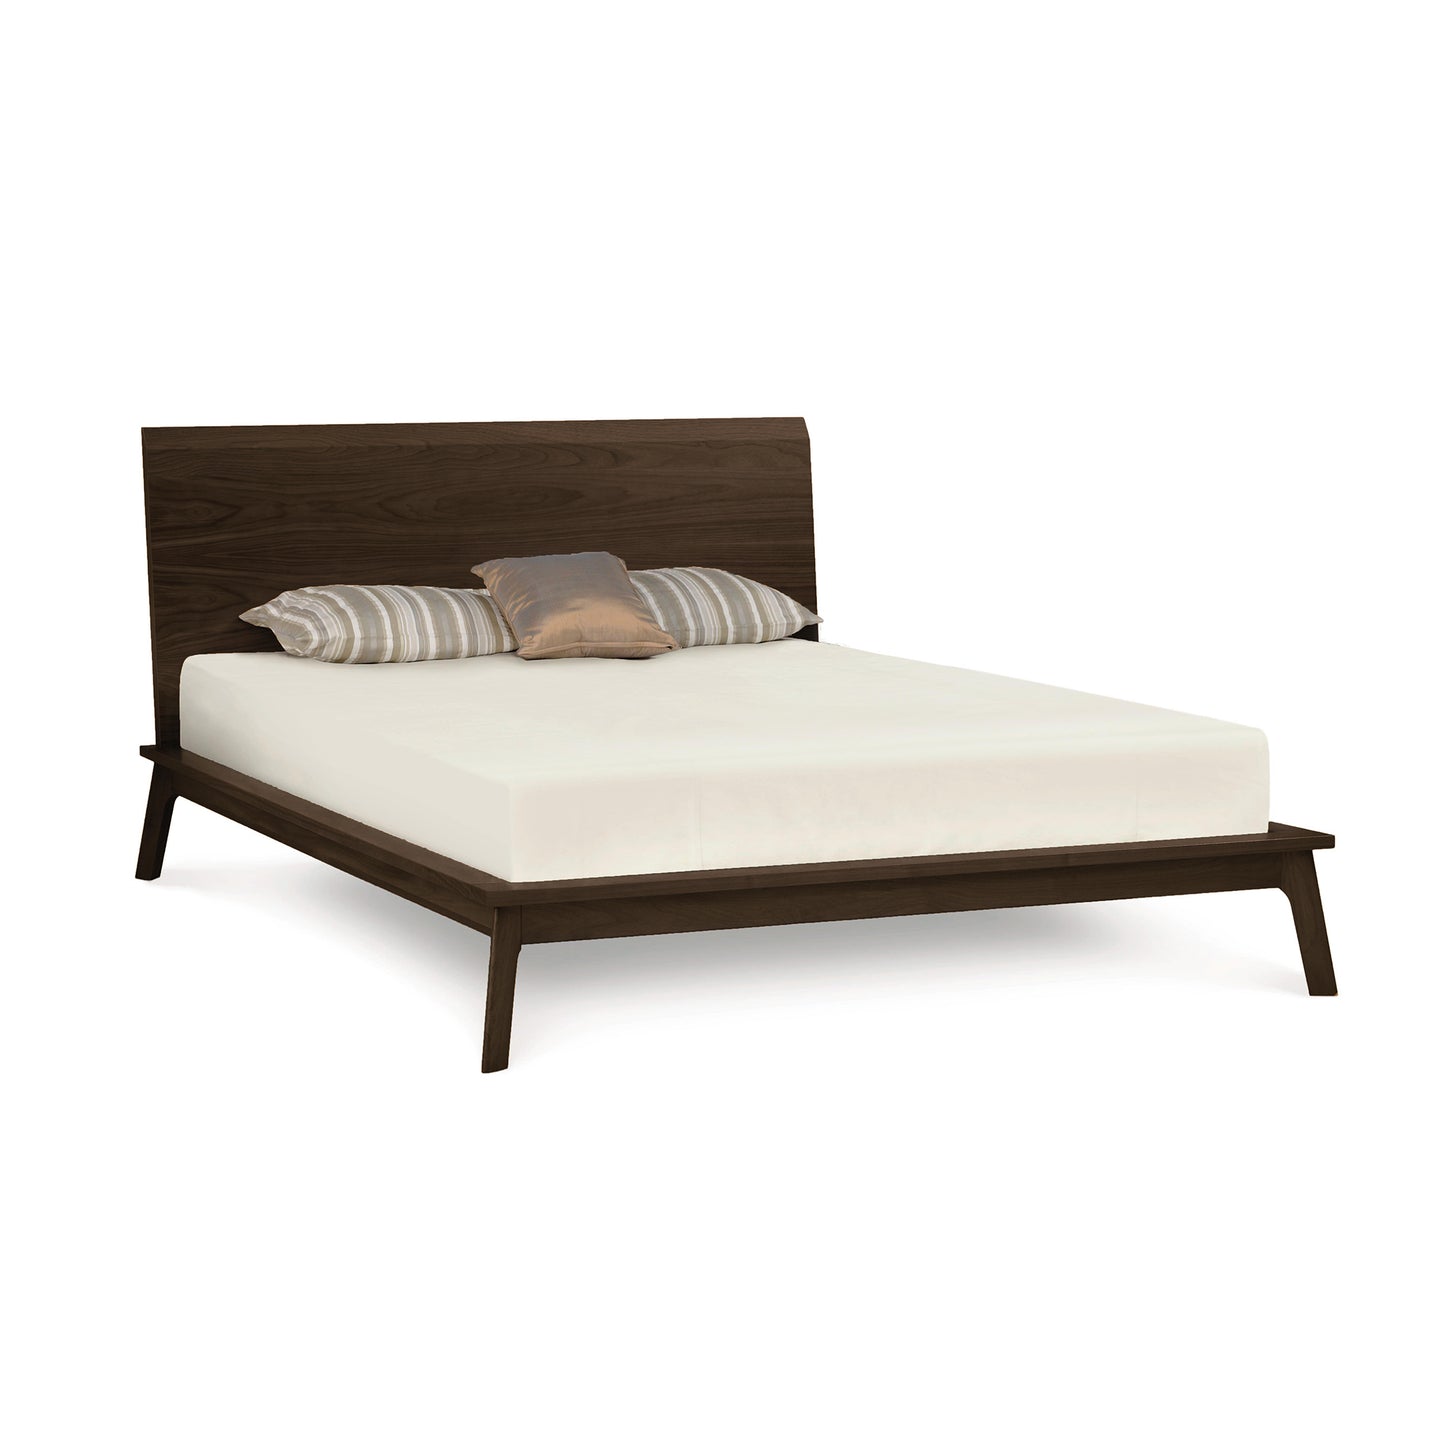 Modern Copeland Furniture Catalina Cherry Platform Bed frame crafted from solid natural cherry hardwood, with a white mattress and three pillows featuring different patterns and sizes.